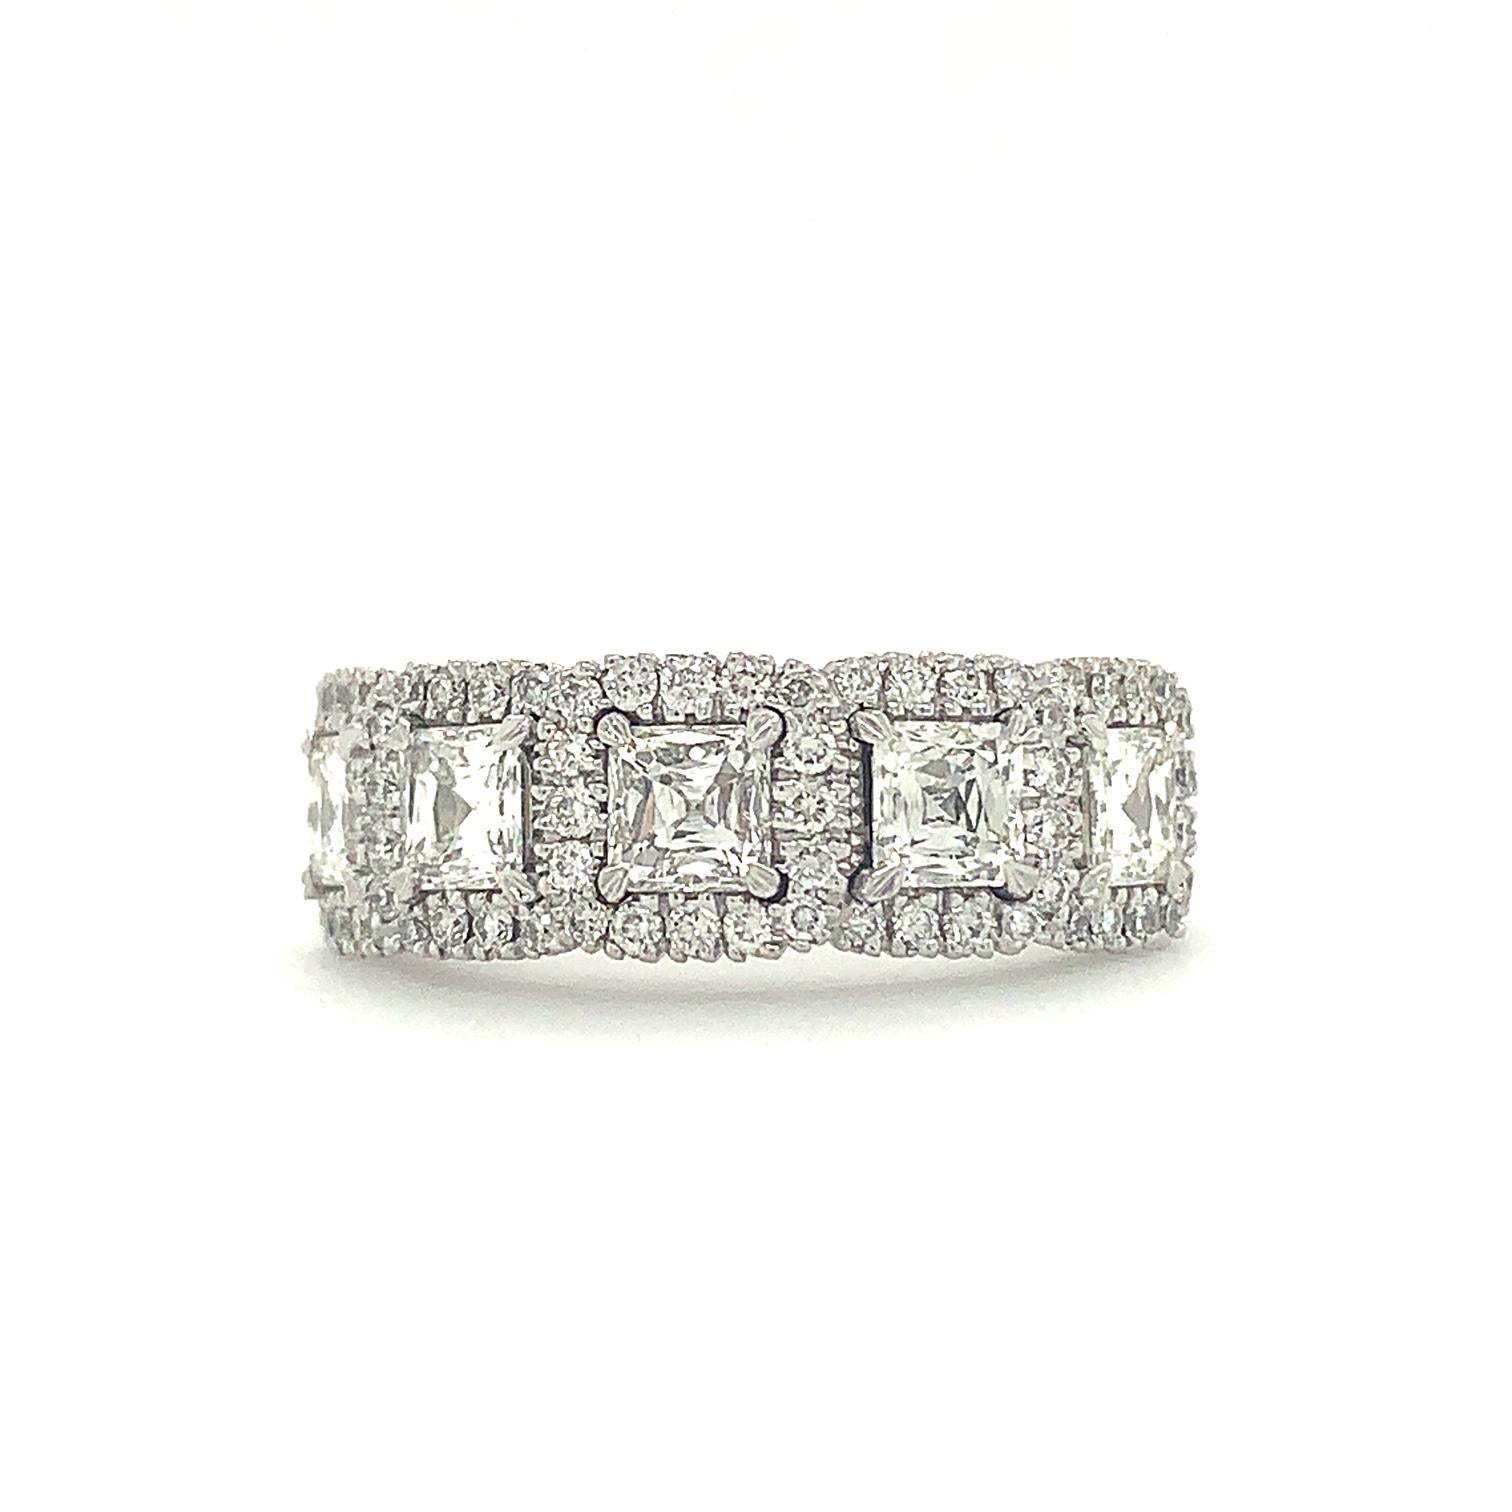 Christopher Designs Crisscut® Asscher Cut 5 Stone Halo Diamond Band  18K White Gold 
5 Asscher cut diamond equal 1.26 ct
Color: H Clarity: SI1
Serial # M26652   
Side Pavé Diamond equals .36 tw. 
Finger Size 6.1/4
6.2 Grams
6.9 mm wide tapering to